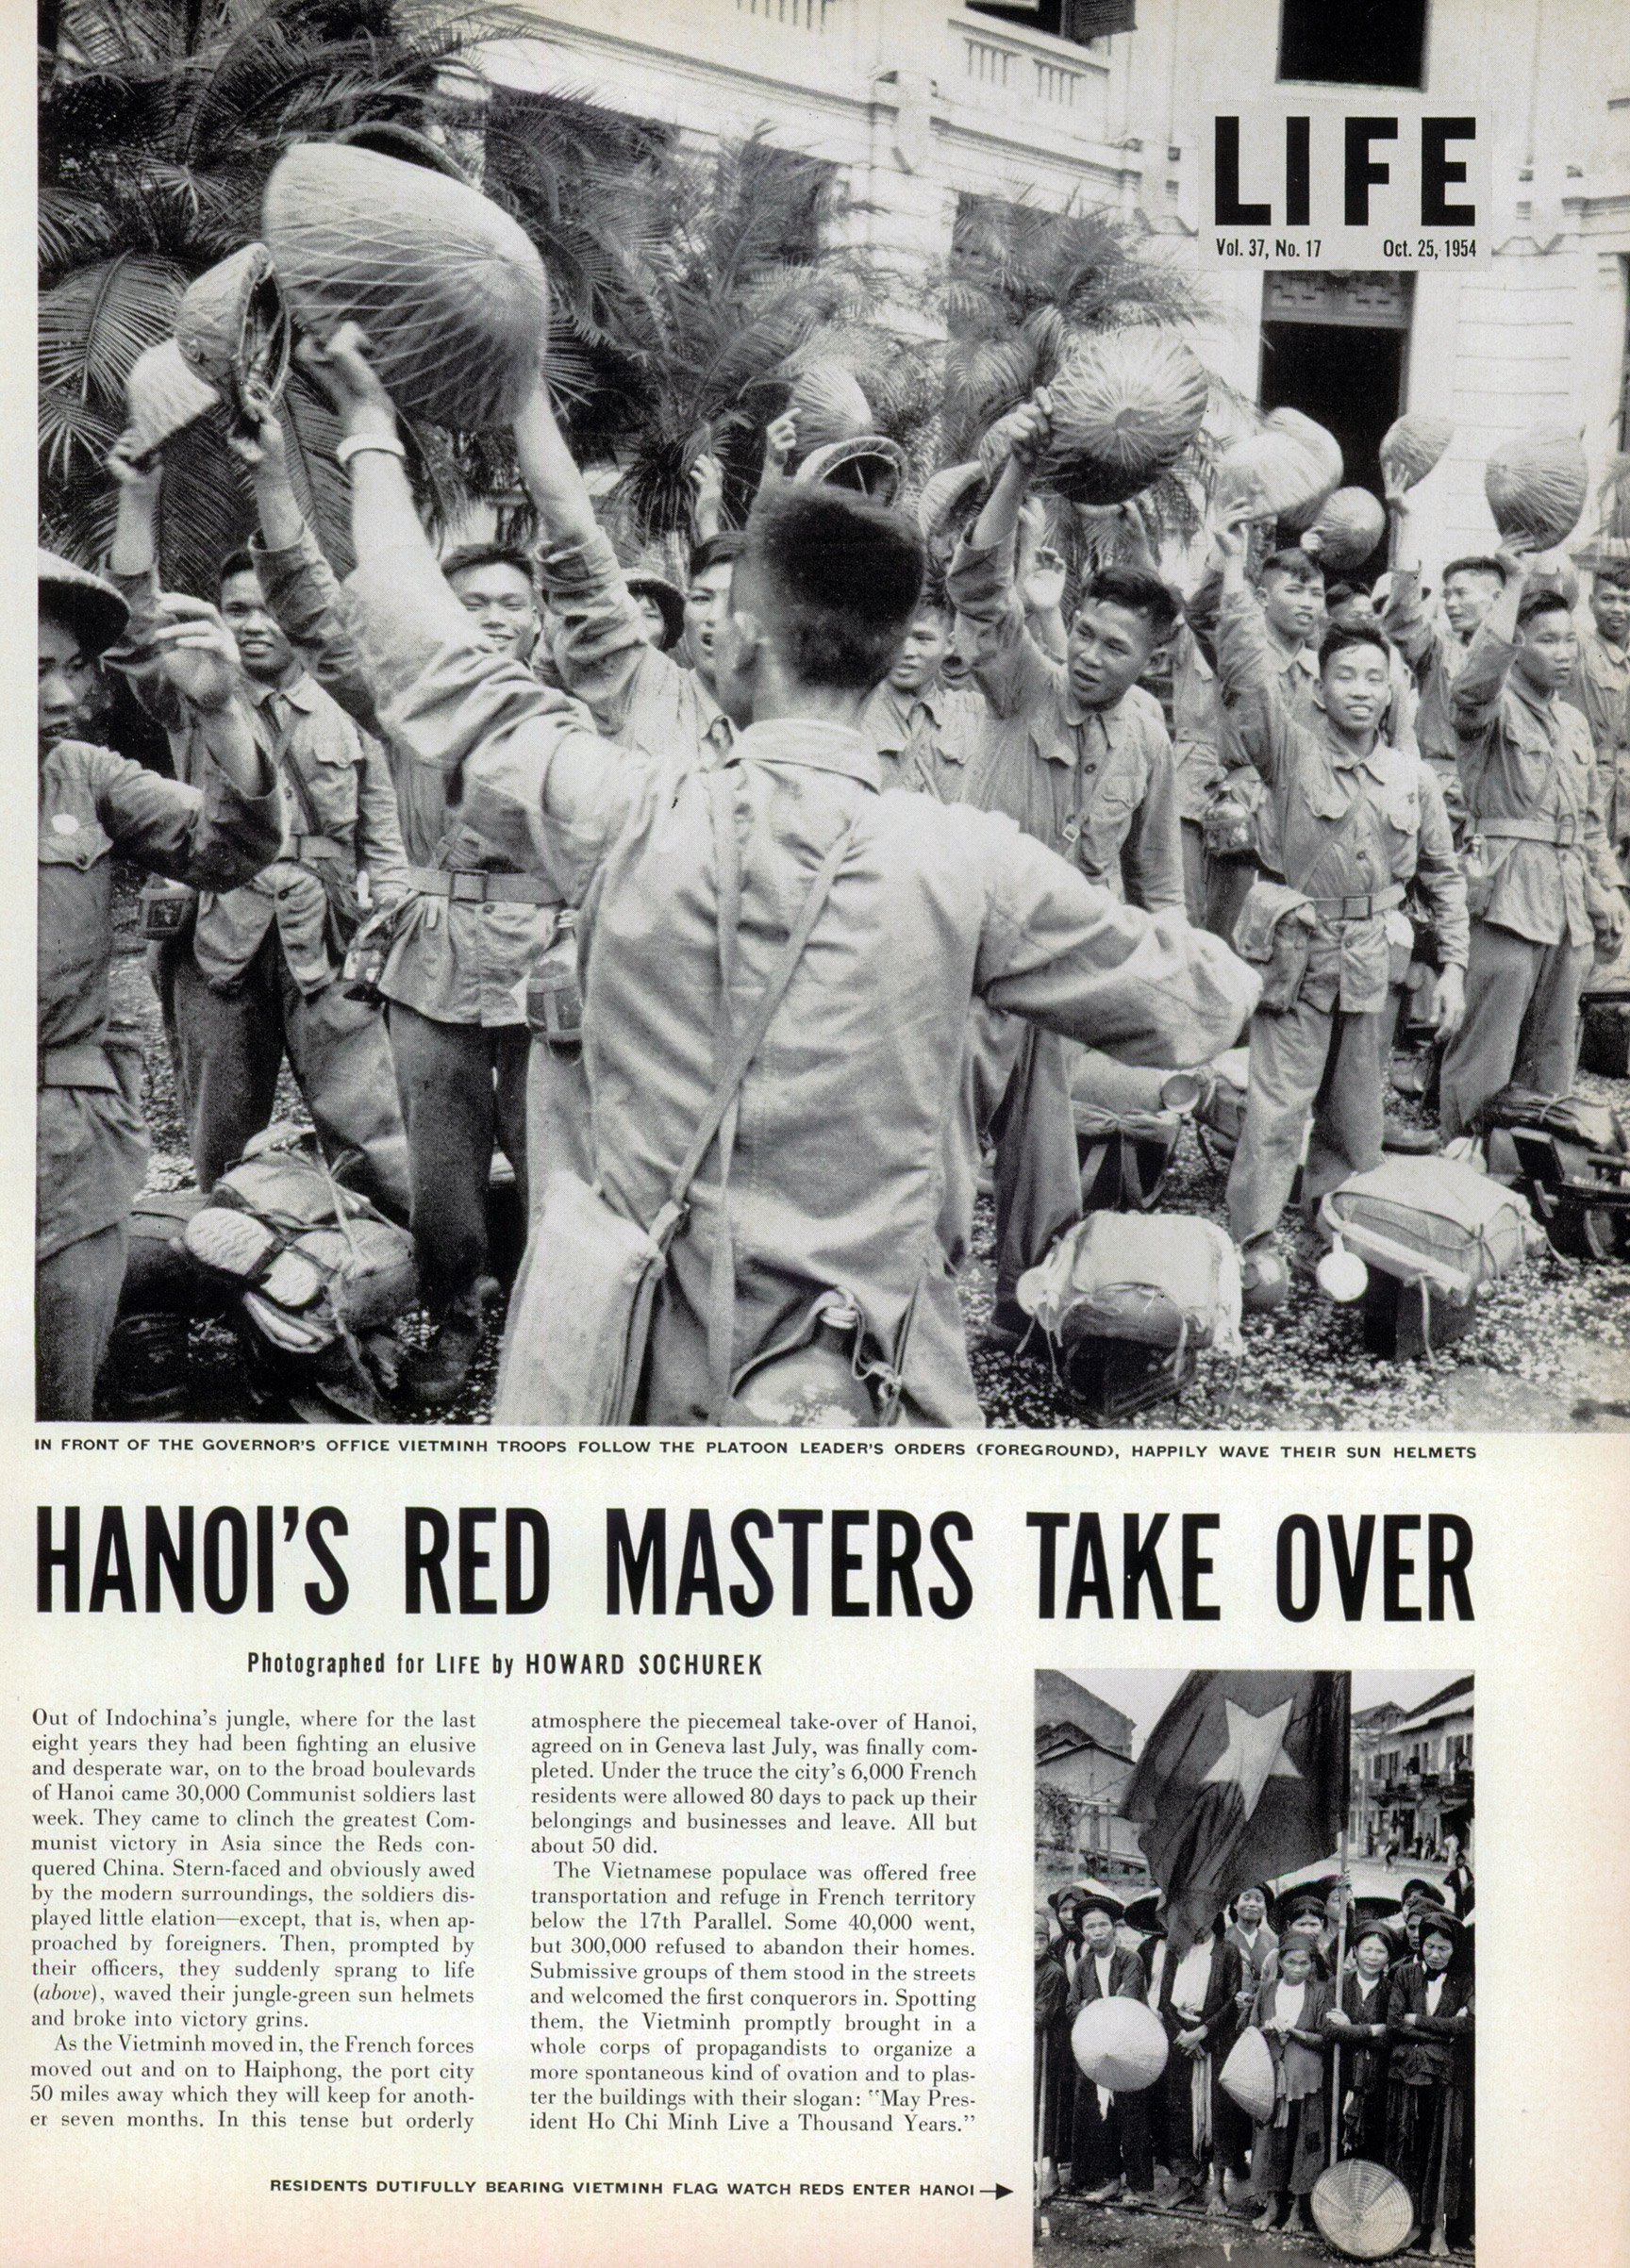 Hanoi's Red Masters Take Over from the Oct. 25, 1954 issue of LIFE magazine. All photos by Howard Sochurek.